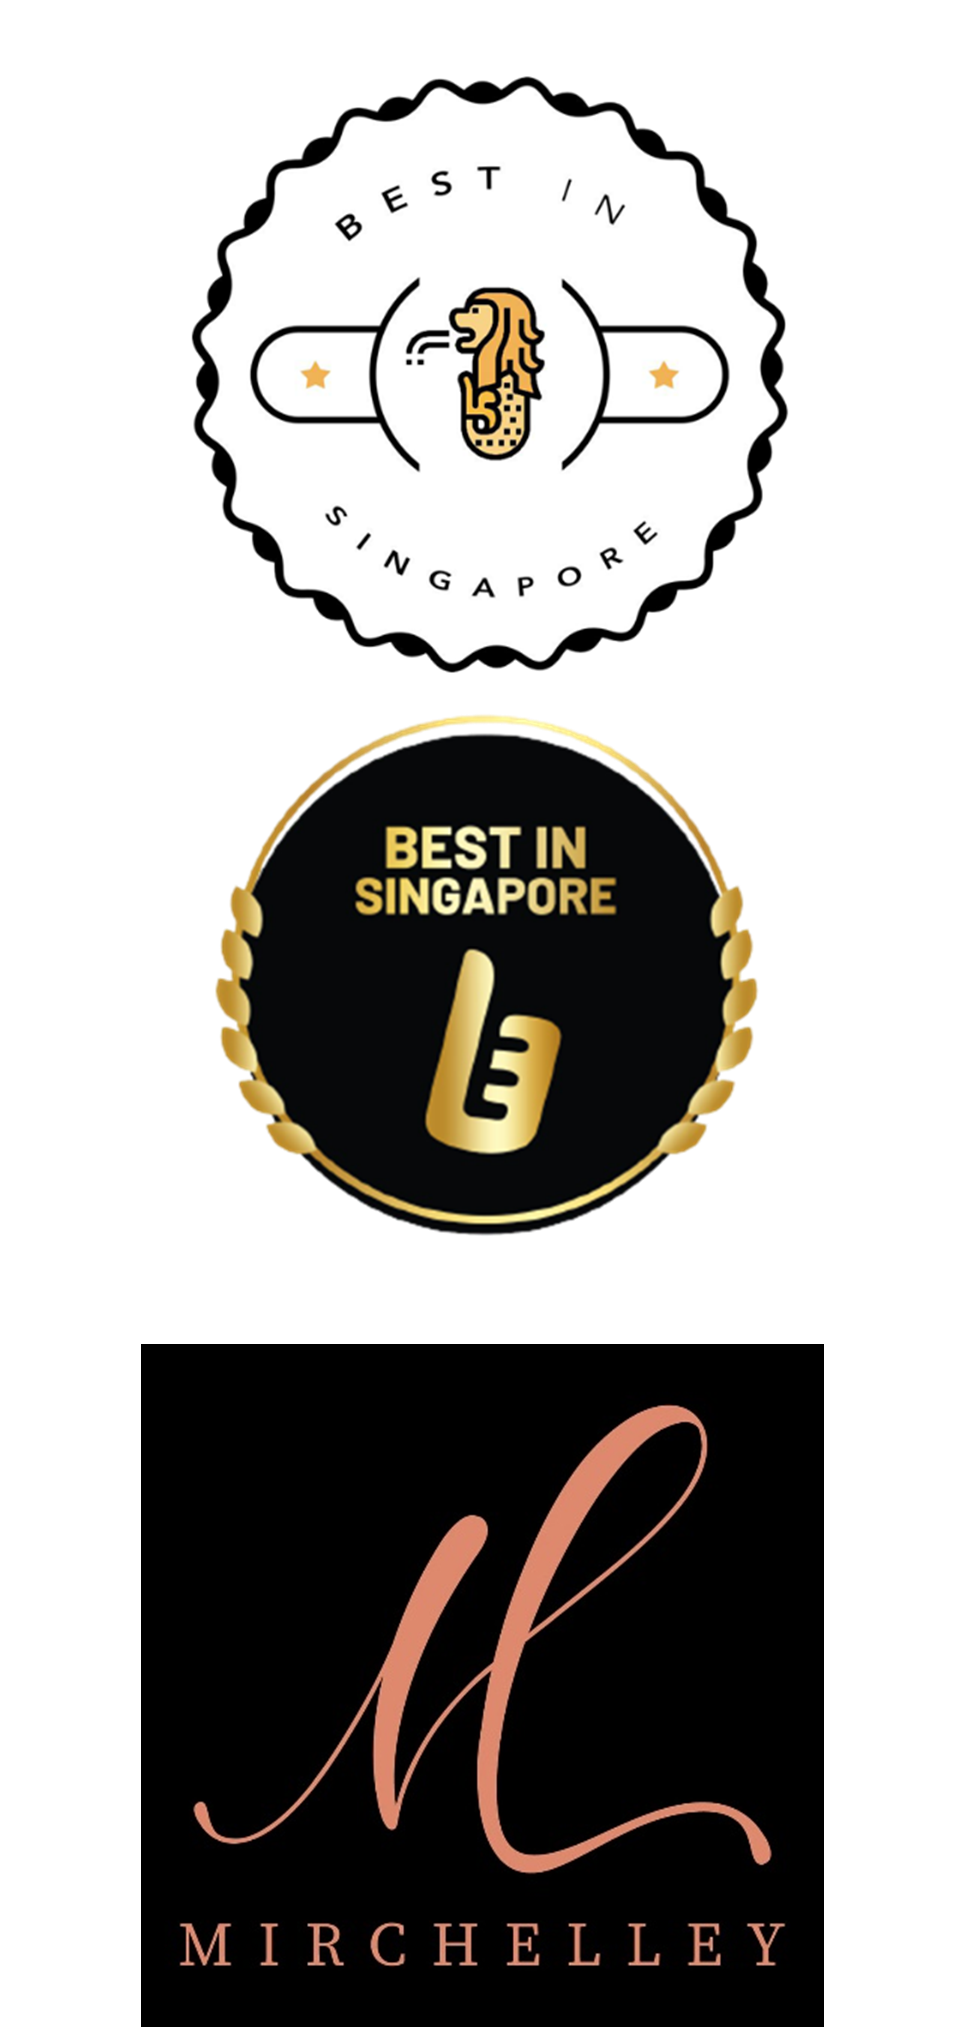 We are listed on Best in Singapore!